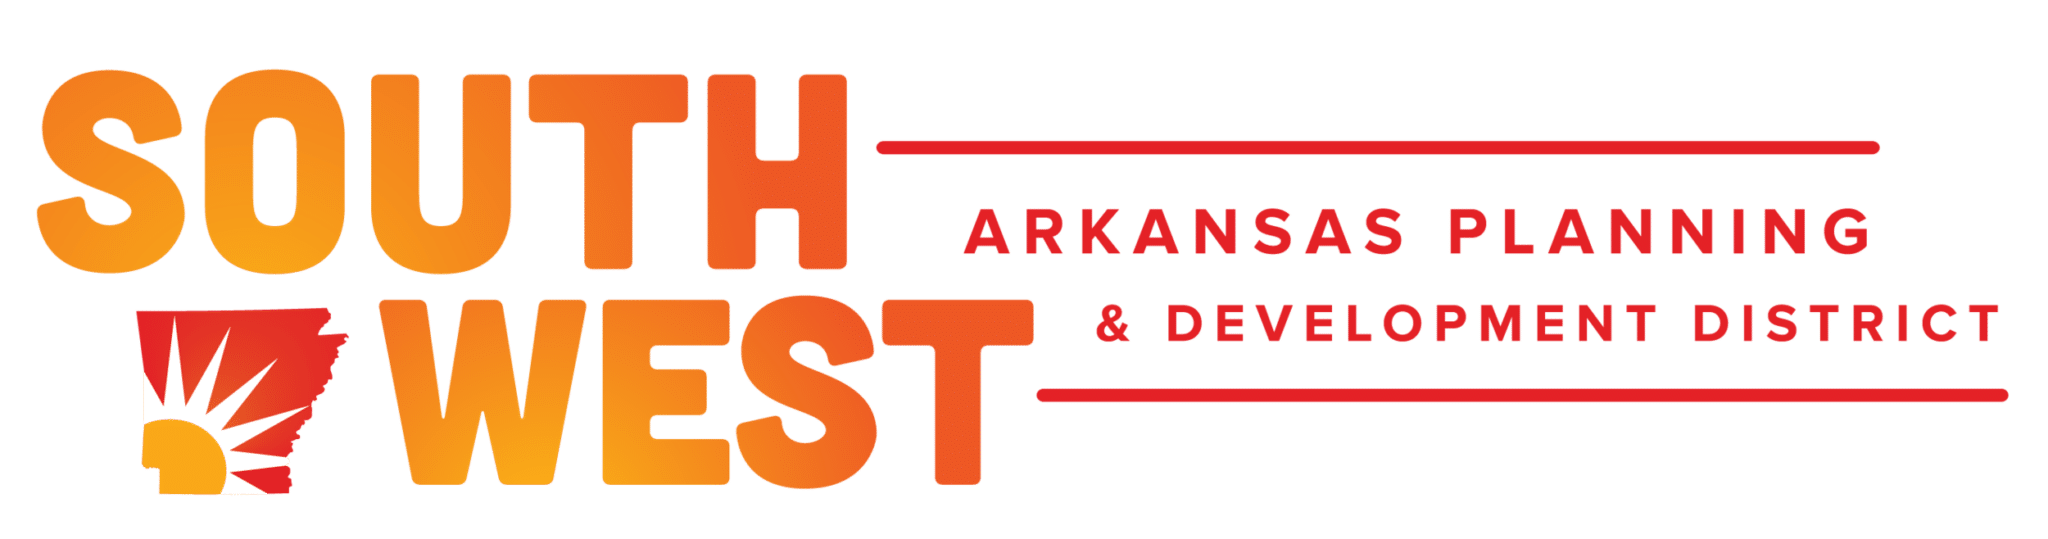 Southwest Arkansas Planning & Development District Logo. The letters are a gradient of orange to red and a small Arkansas icon with a sun inside of it is to the left of the words.